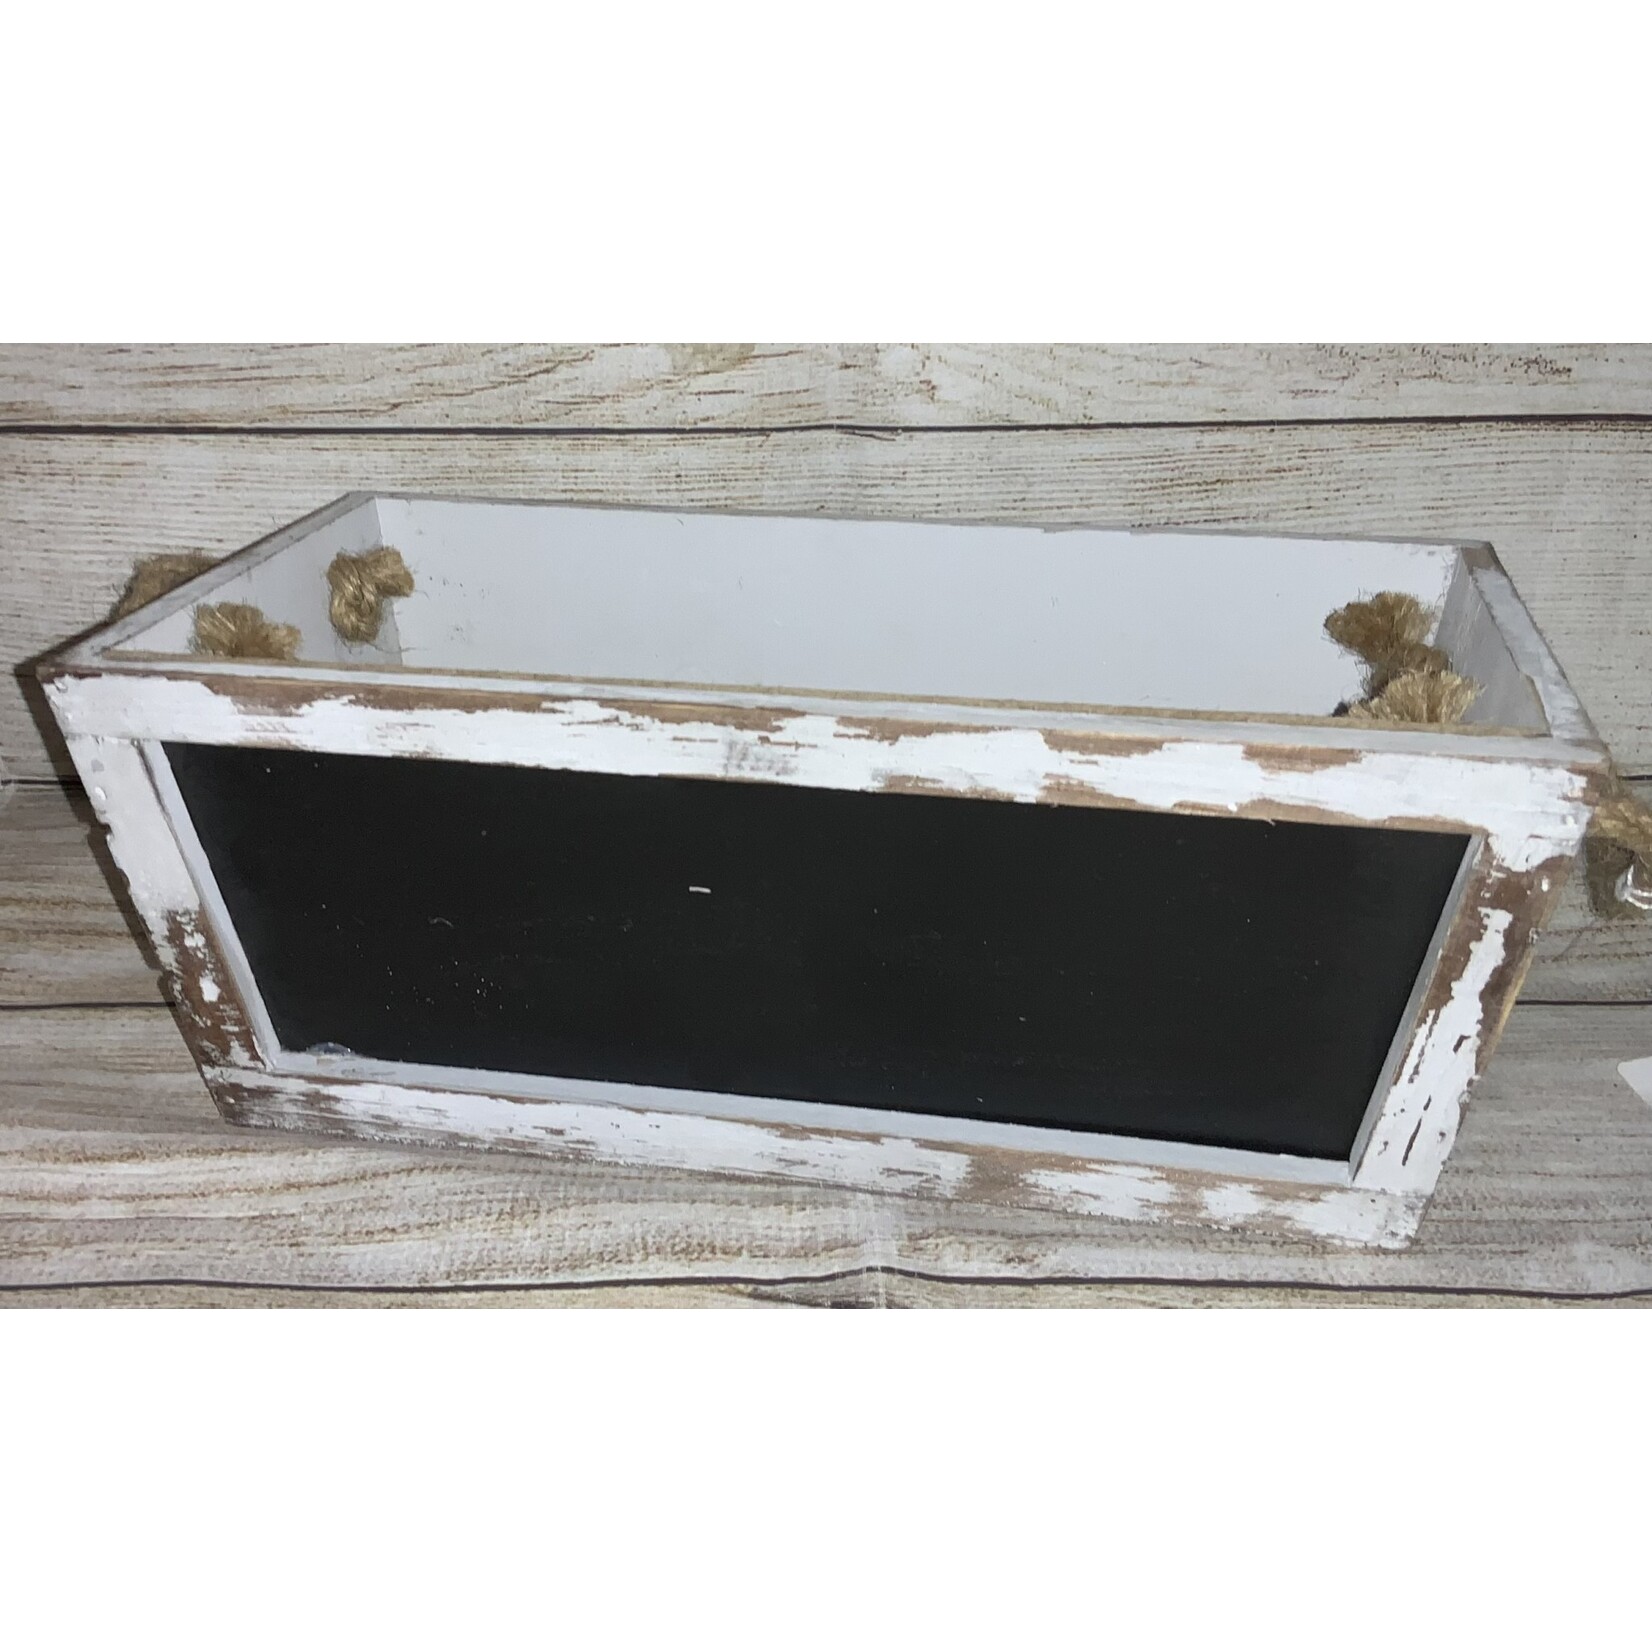 Darice Wooden Crate w/Chalkboard & Rope Handles Small